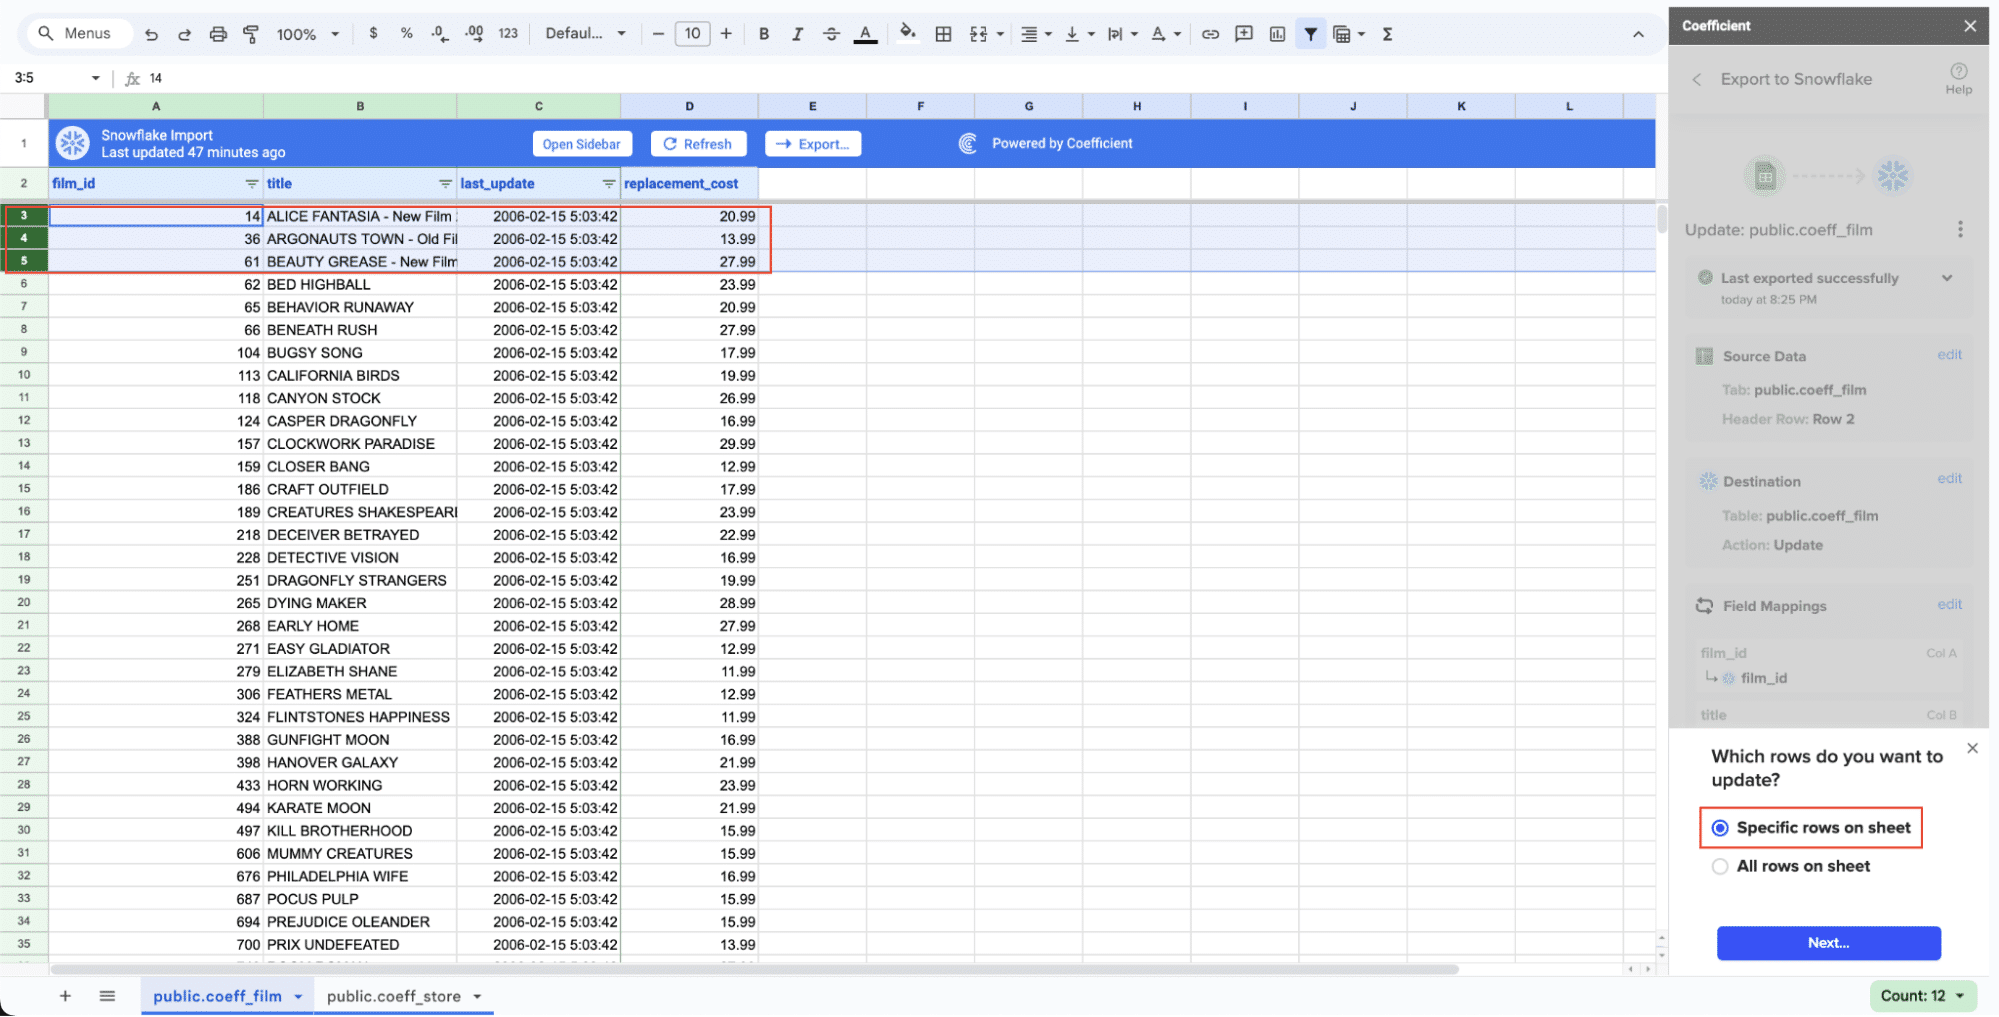 Preview for Chargebee Data Export to Google Sheets using Coefficient add-on
